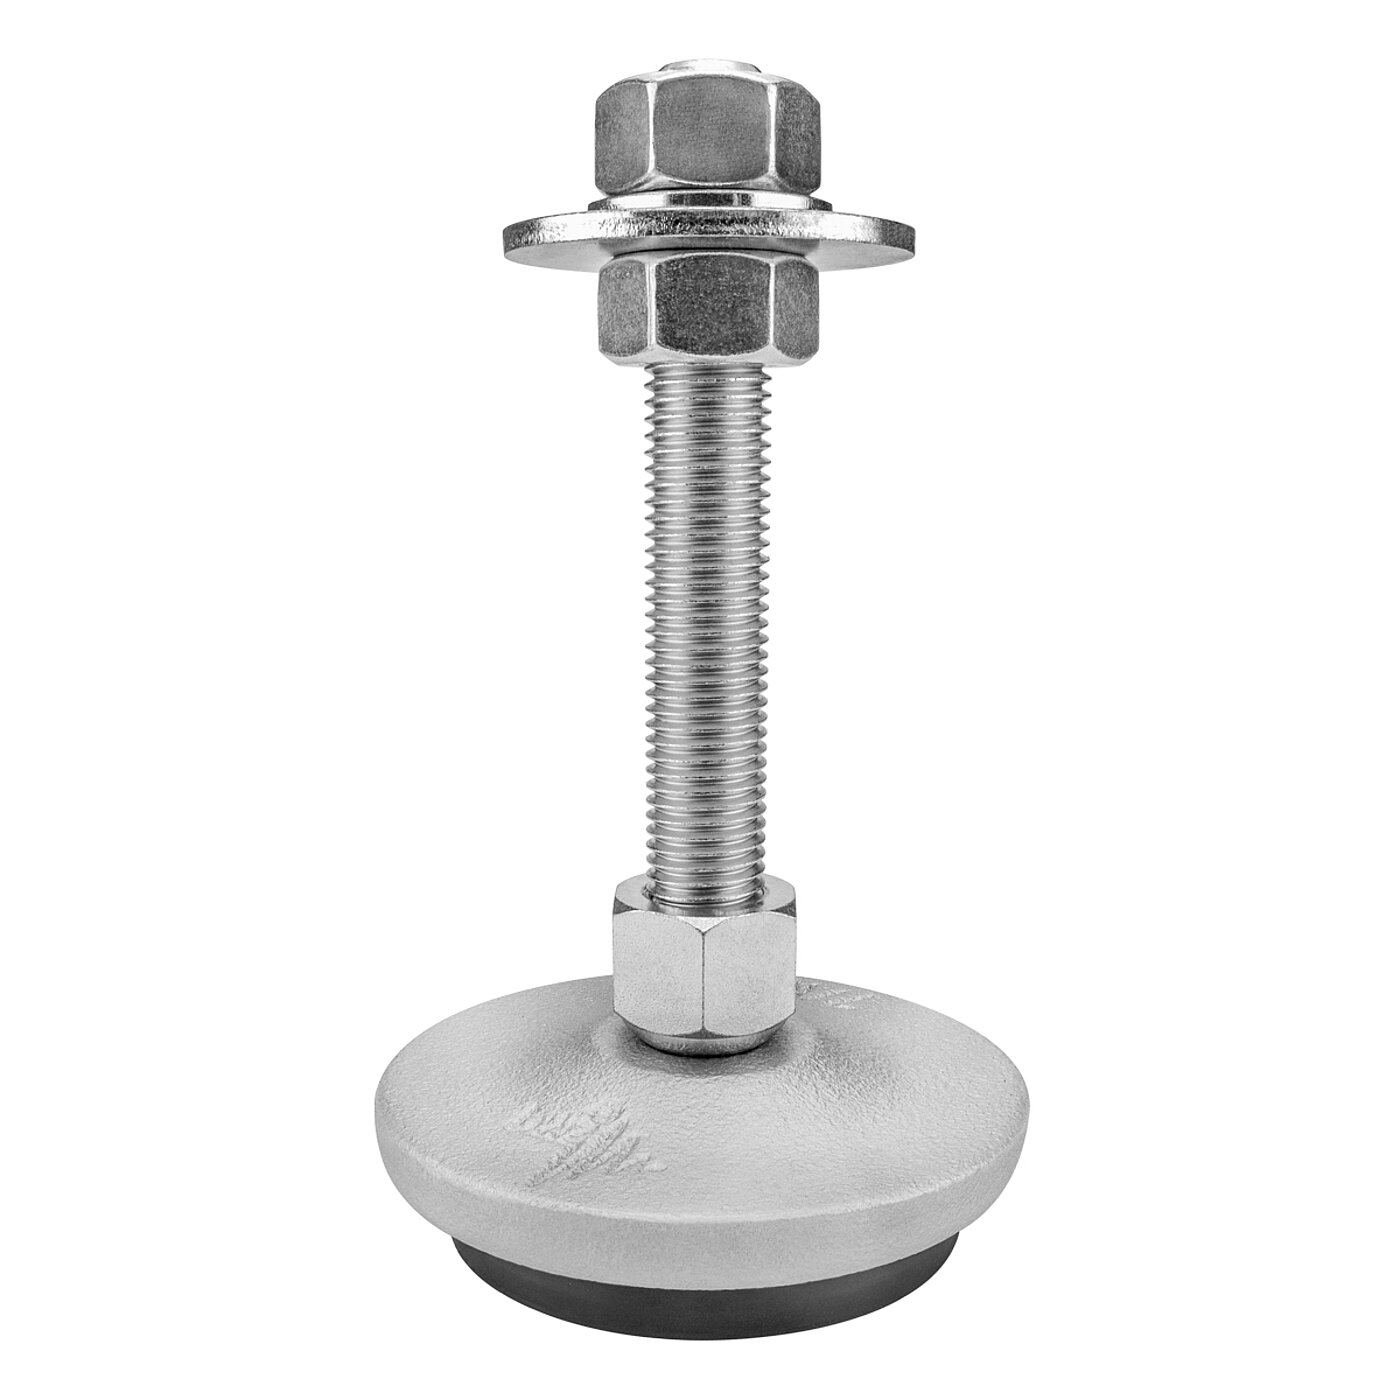 a round, silver-lacquered levelling element made of cast iron, with a pendulum-action zinc-coated levelling screw placed in a hexagonal cap nut on top of the cast iron corpus, with the corpus and cap nut tightly connected to each other against falling apart, and black elastomer for vibration damping at the bottom, isolated on white background